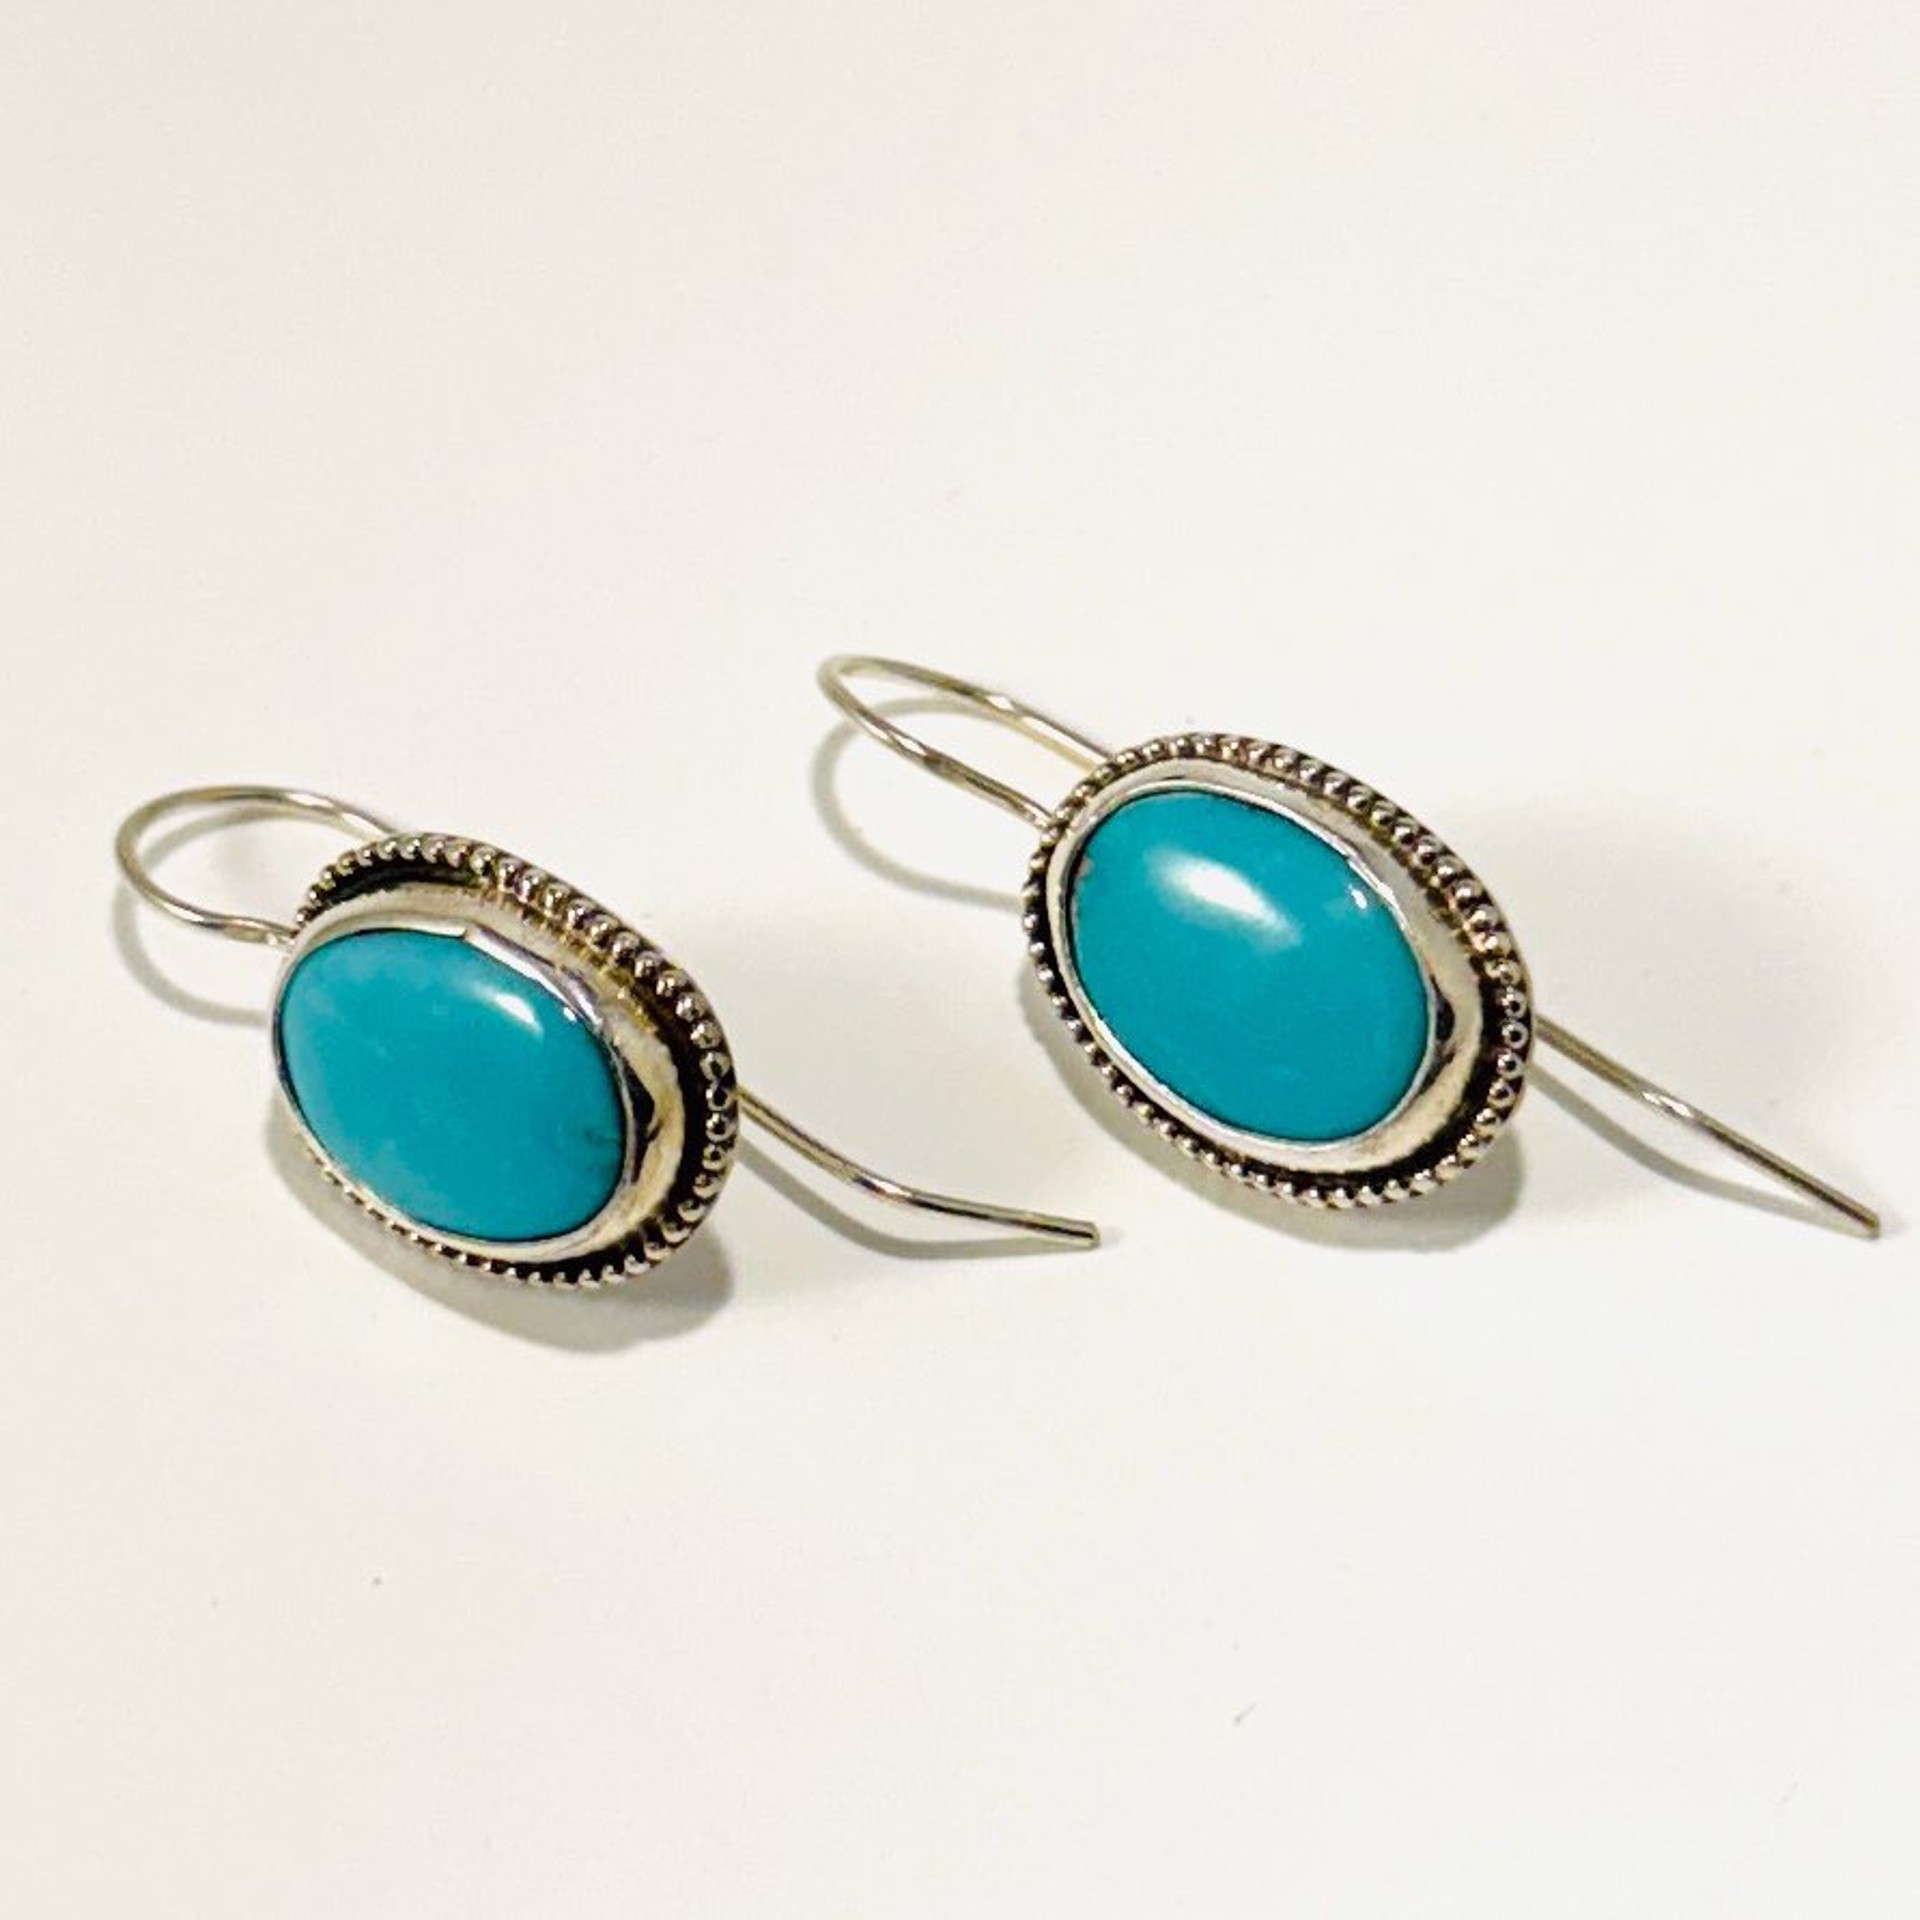 Kingman Turquoise Earrings AB23-85 by Anne Bivens